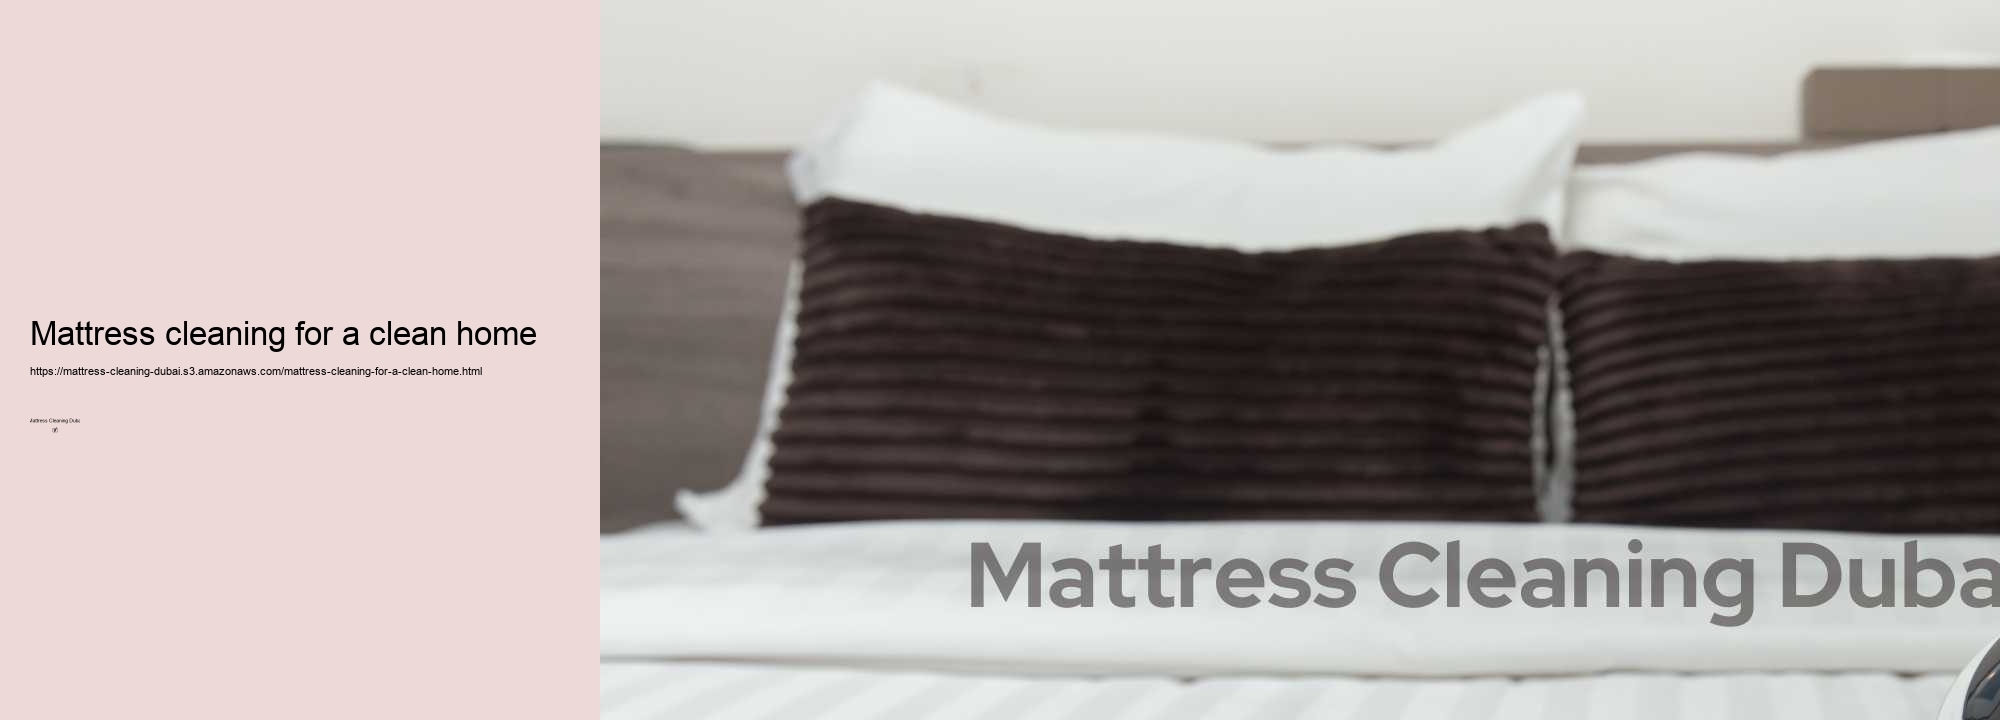 Mattress cleaning for a clean home